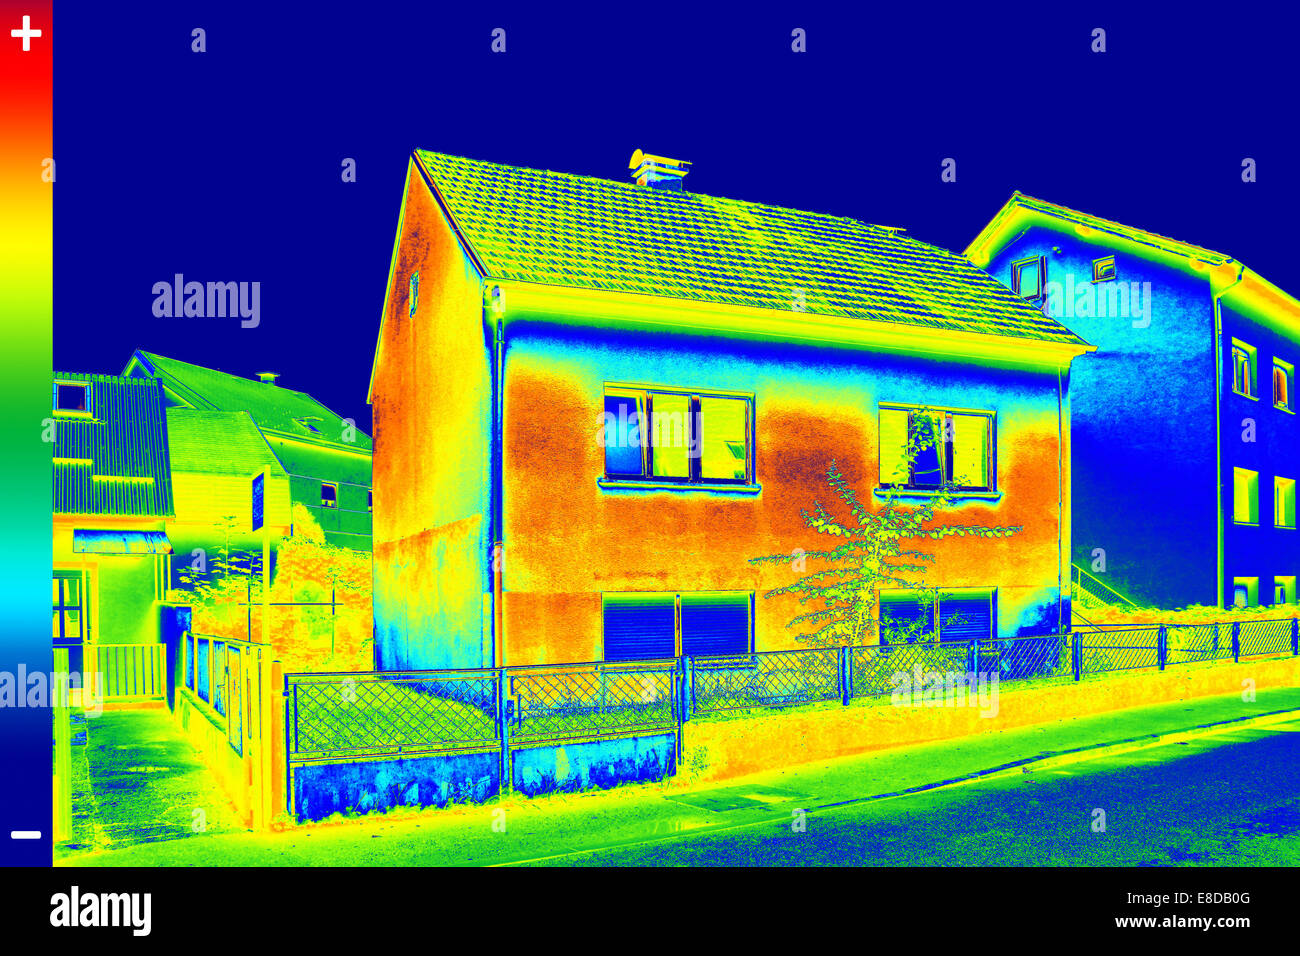 https://c8.alamy.com/comp/E8DB0G/infrared-thermovision-image-showing-lack-of-thermal-insulation-on-E8DB0G.jpg